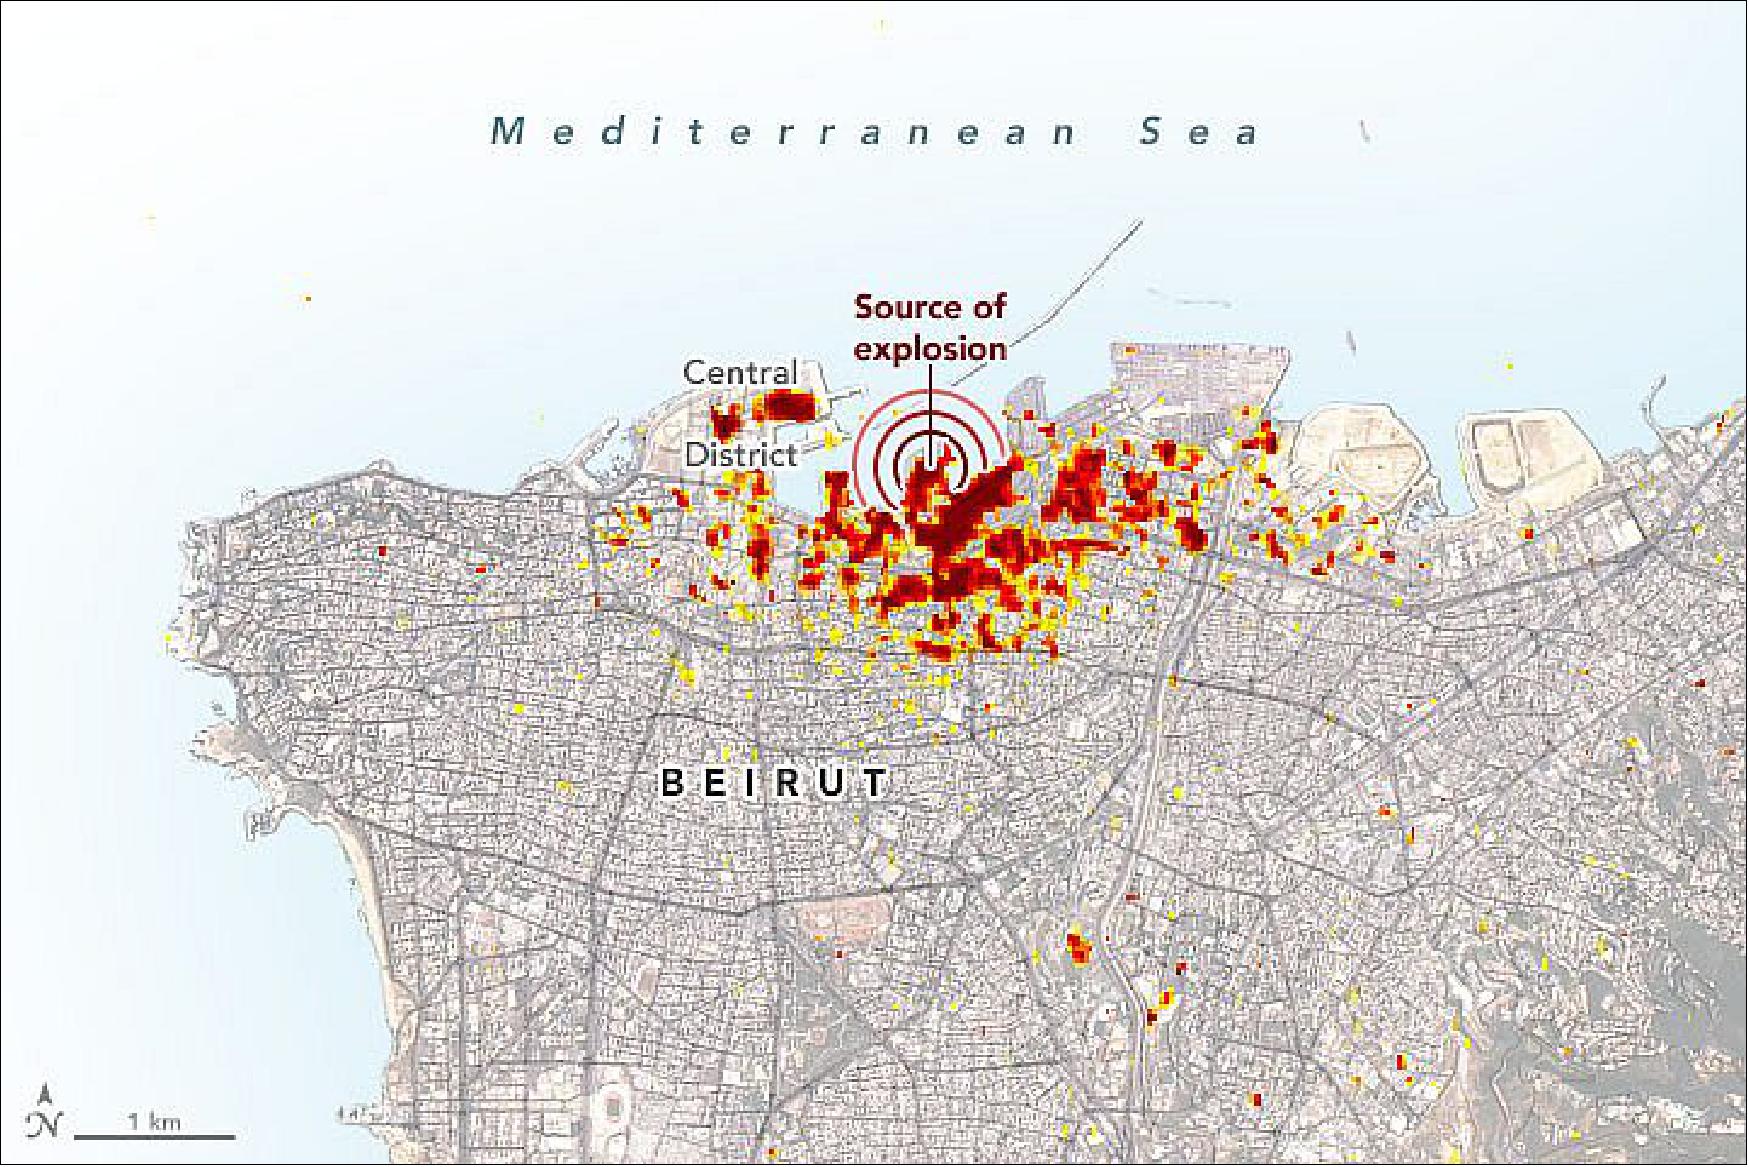 Figure 12: This image is a damage proxy map created by scientists affiliated with NASA’s Advanced Rapid Imaging and Analysis (ARIA) team and the Earth Observatory of Singapore (EOS). Dark red pixels represent the most severe damage, while orange and yellow areas are moderately or partially damaged. Each colored pixel represents an area of 30 m2 (about the size of a baseball diamond), [image credit: NASA Earth Observatory image by Joshua Stevens, using modified Copernicus Sentinel data (2020) processed by ESA and analyzed by Earth Observatory of Singapore (EOS) in collaboration with NASA-JPL and Caltech, Landsat data from the U.S. Geological Survey, and data from OpenStreetMap. Story by Esprit Smith, NASA's Earth Science News Team, and Michael Carlowicz]